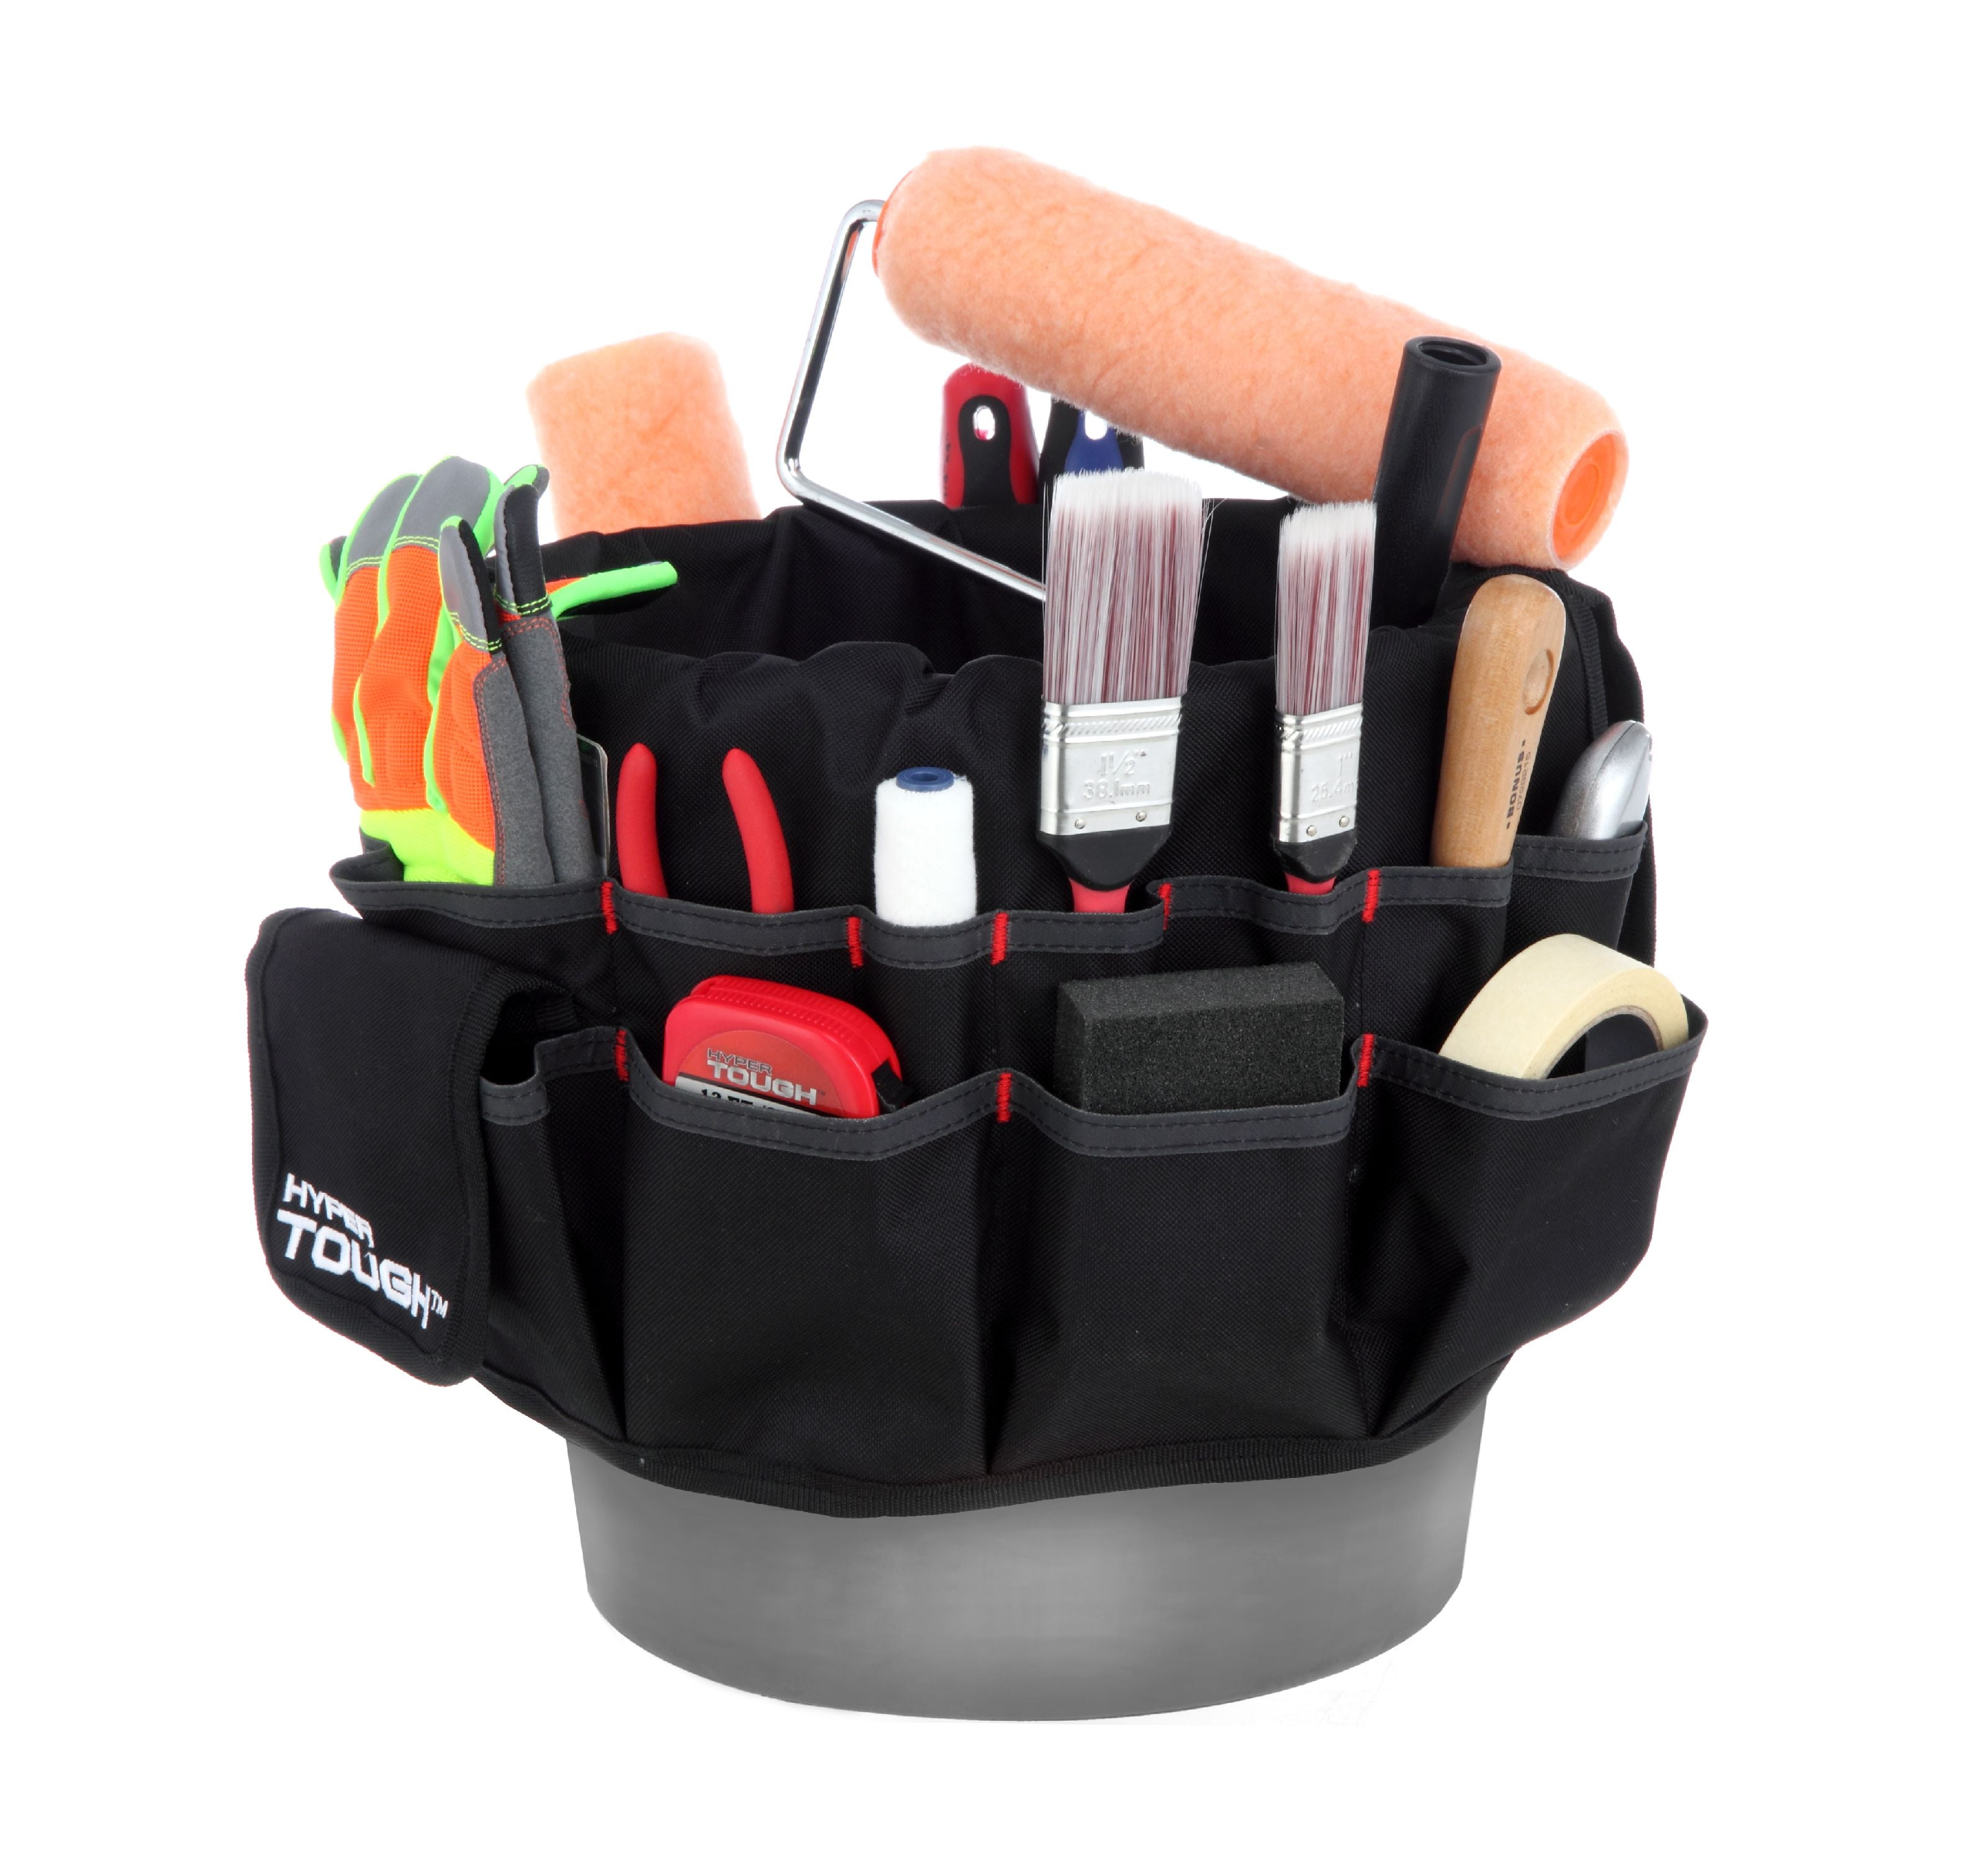  Palmyth Ice Fishing Bucket Tool Organizer, Adjustable Bucket  Caddy Tackle Bag with Plier Holder for 5-Gallon Bucket : Sports & Outdoors